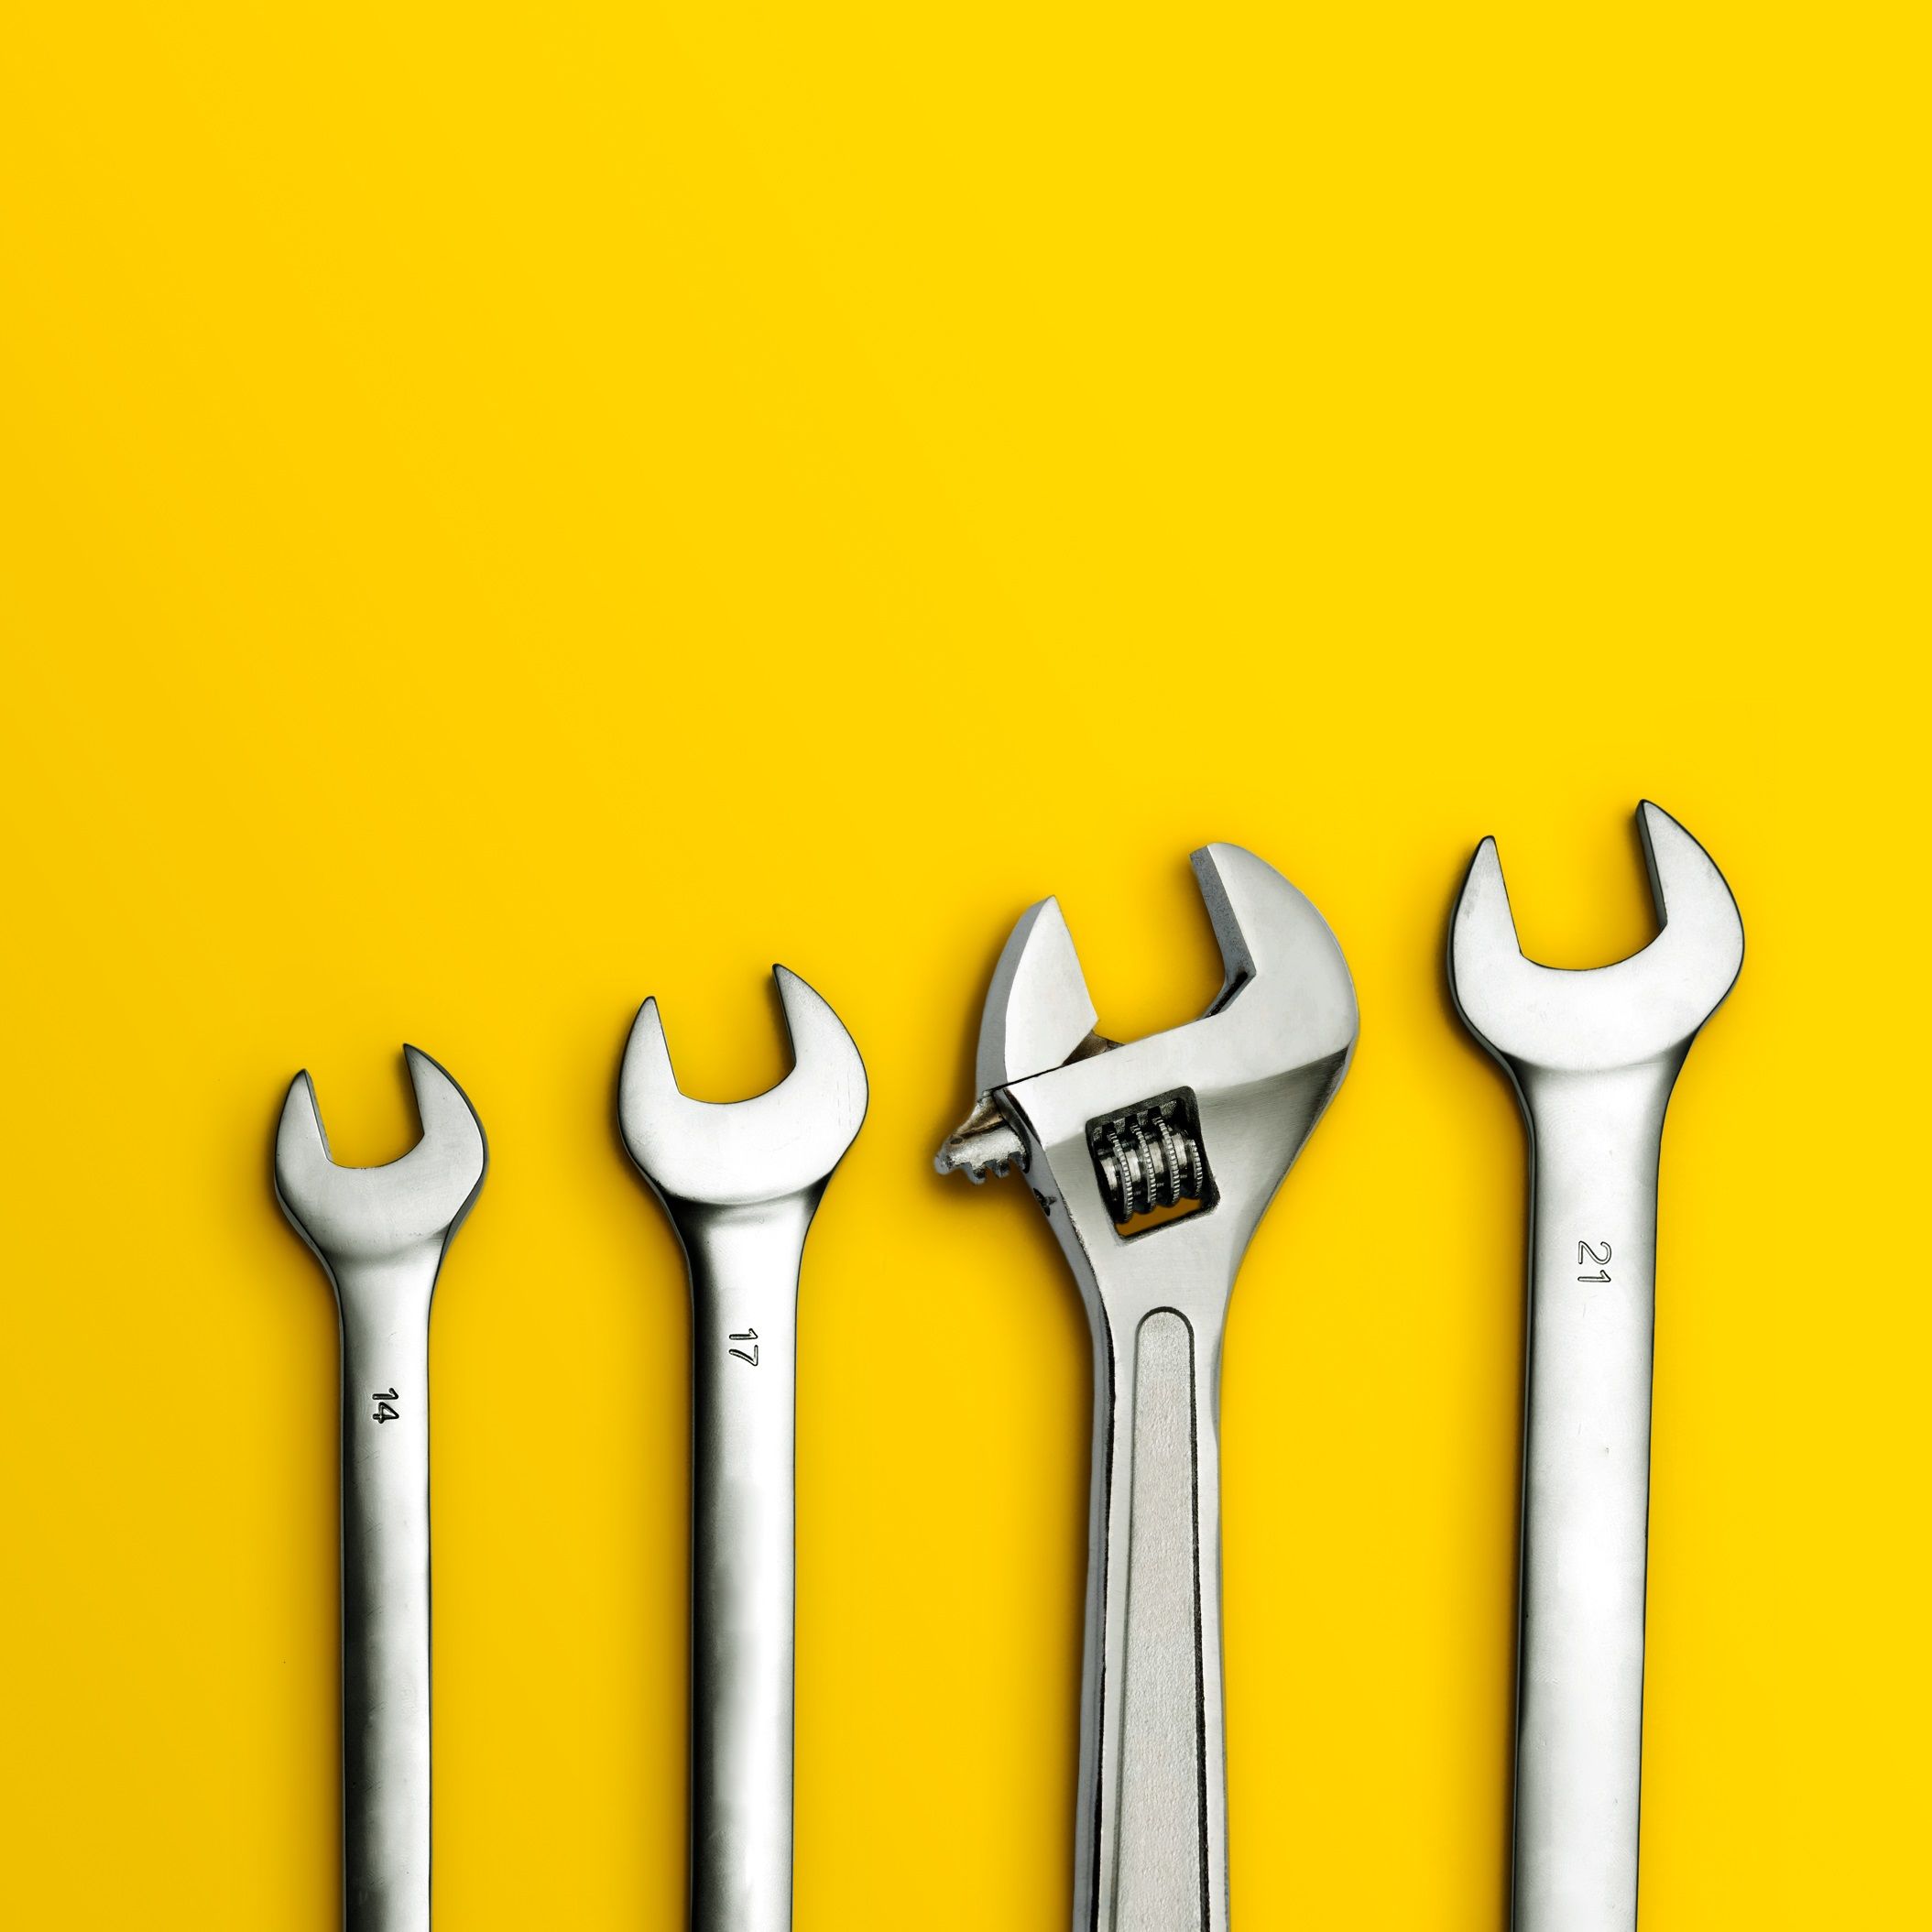 wrenches on yellow background